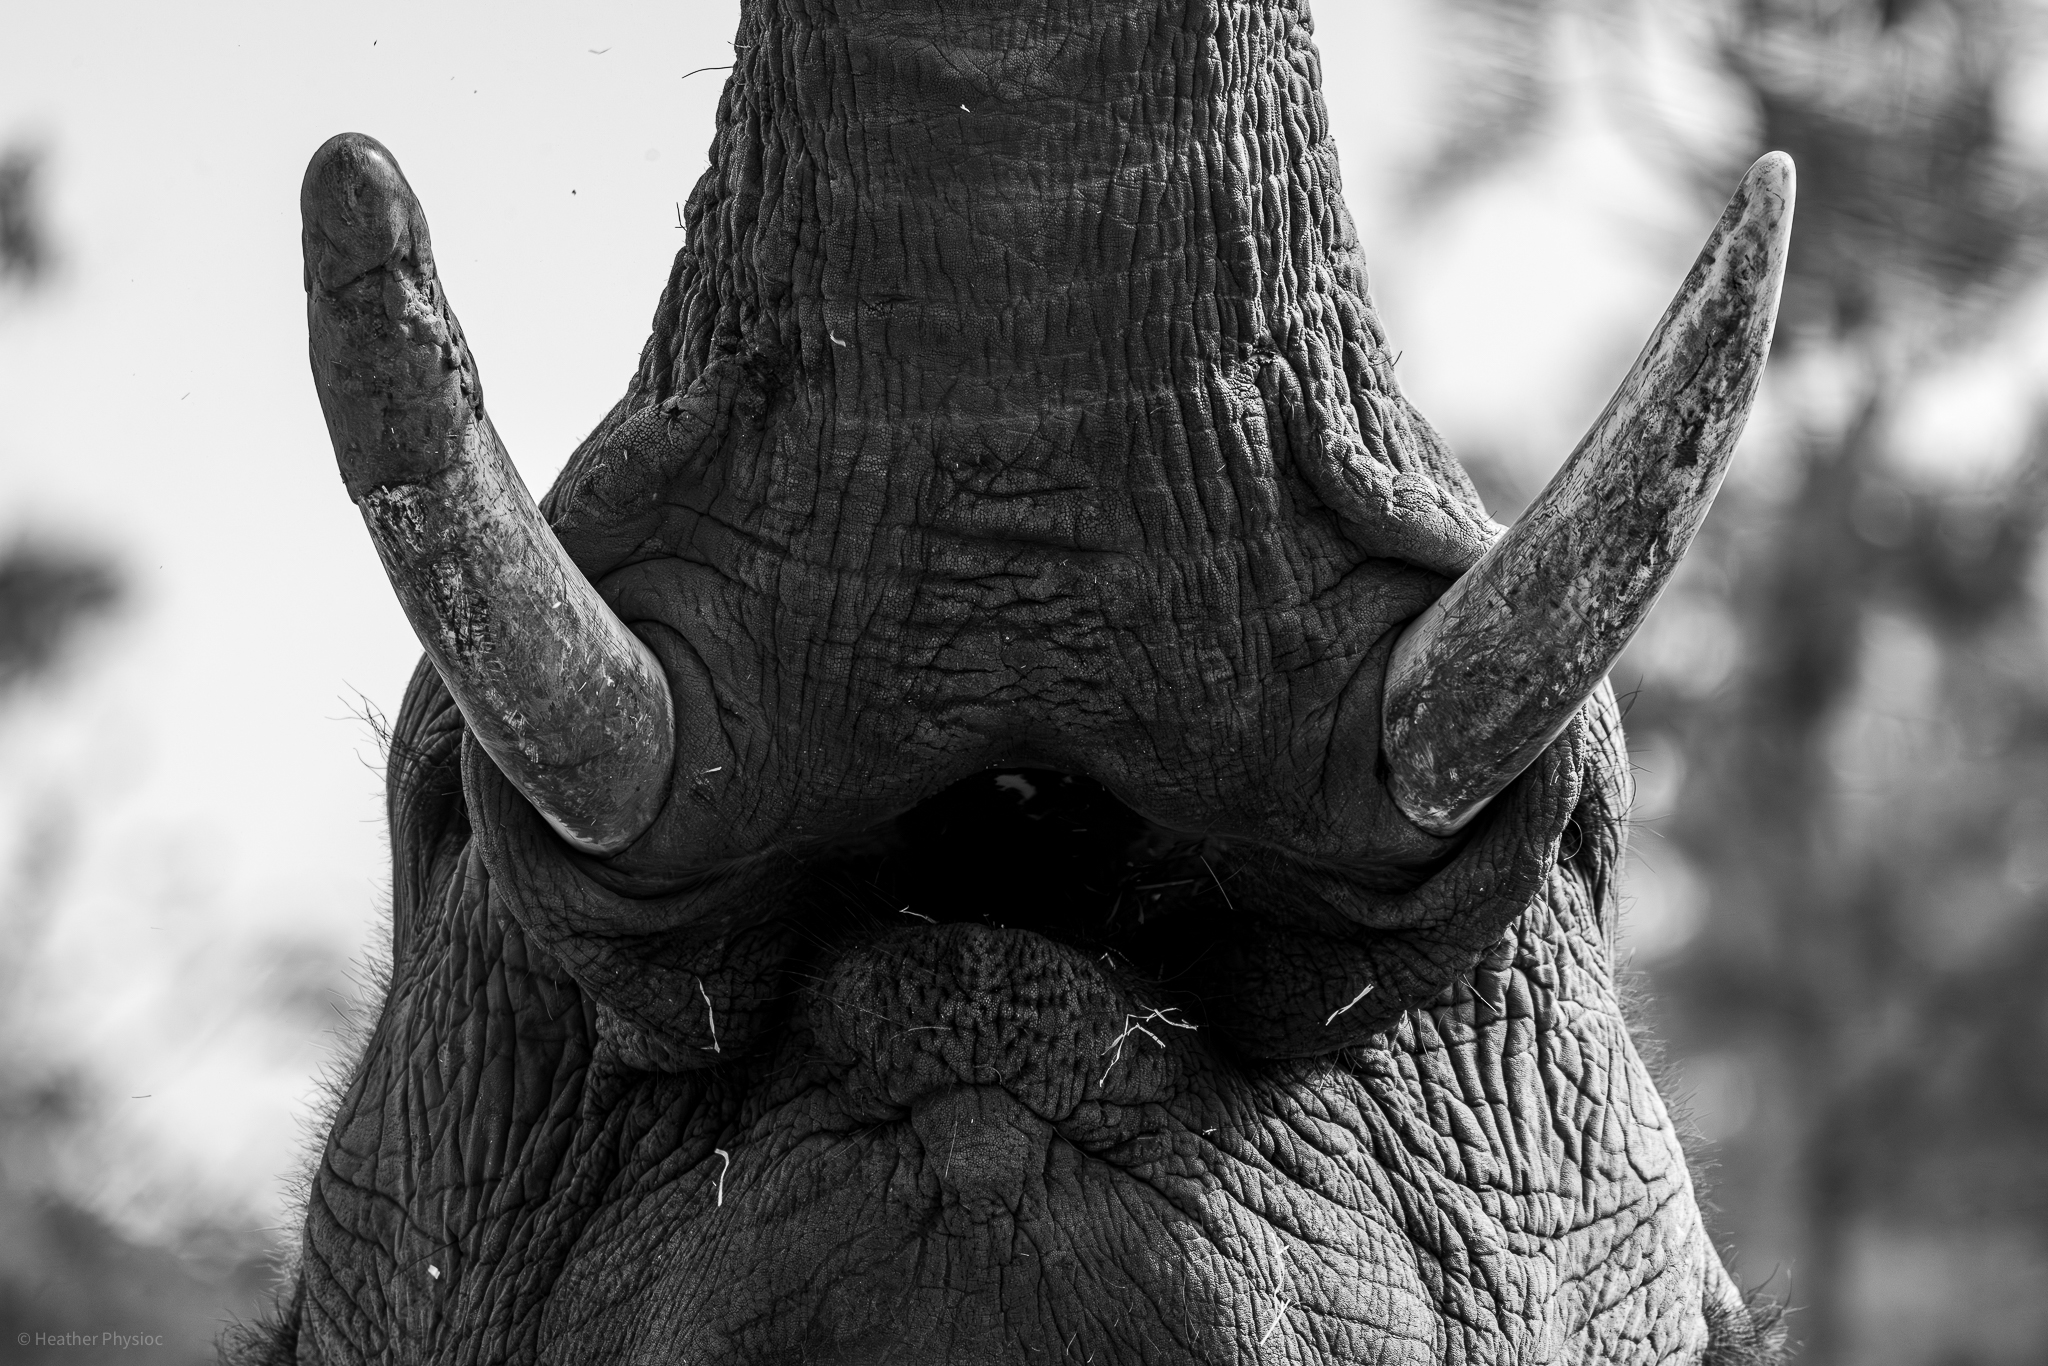 Black & White abstract portrait of an elephant